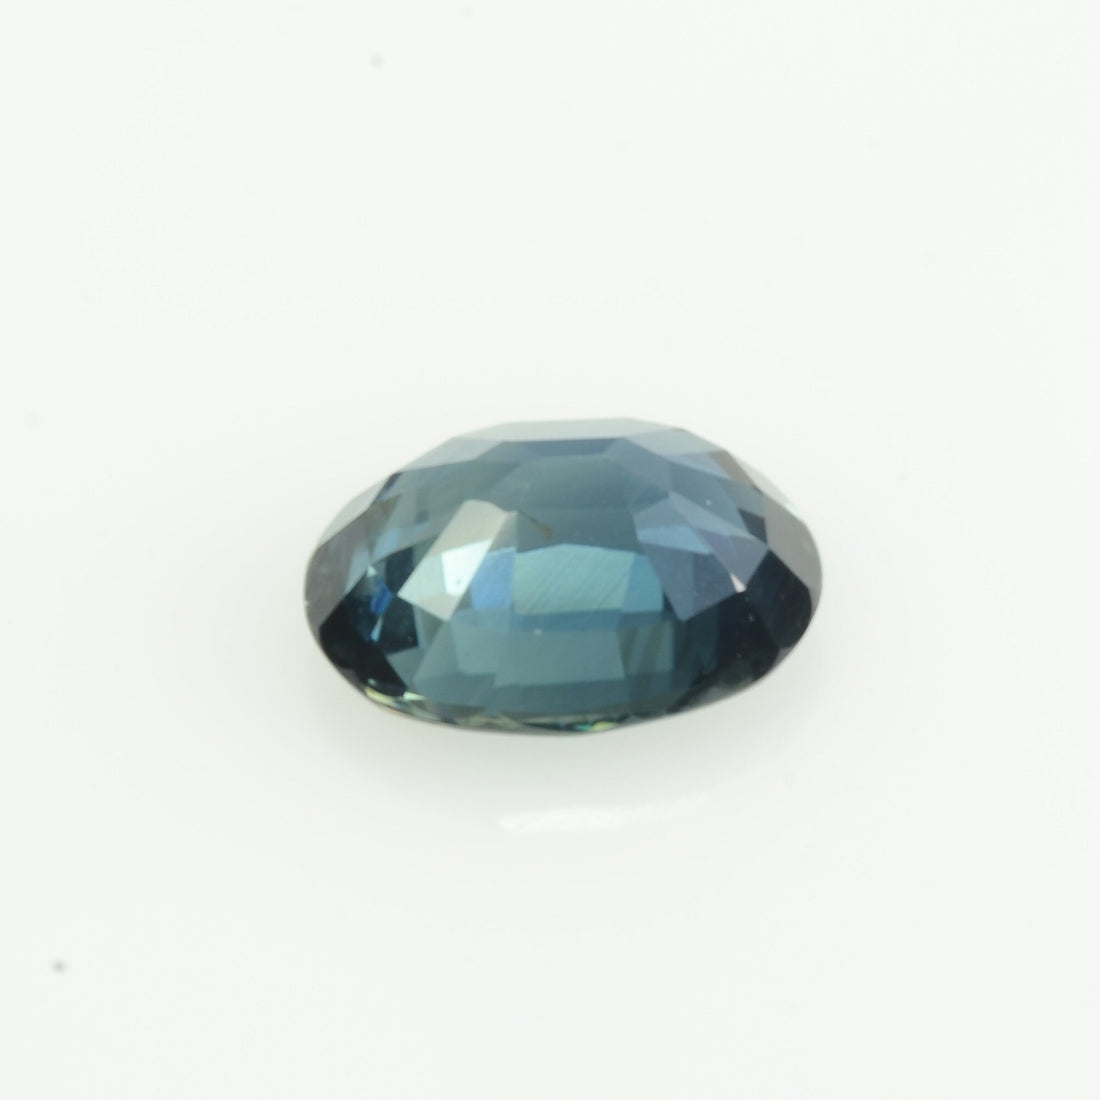 0.78 cts Natural Teal Blue Sapphire Loose Gemstone Oval Cut